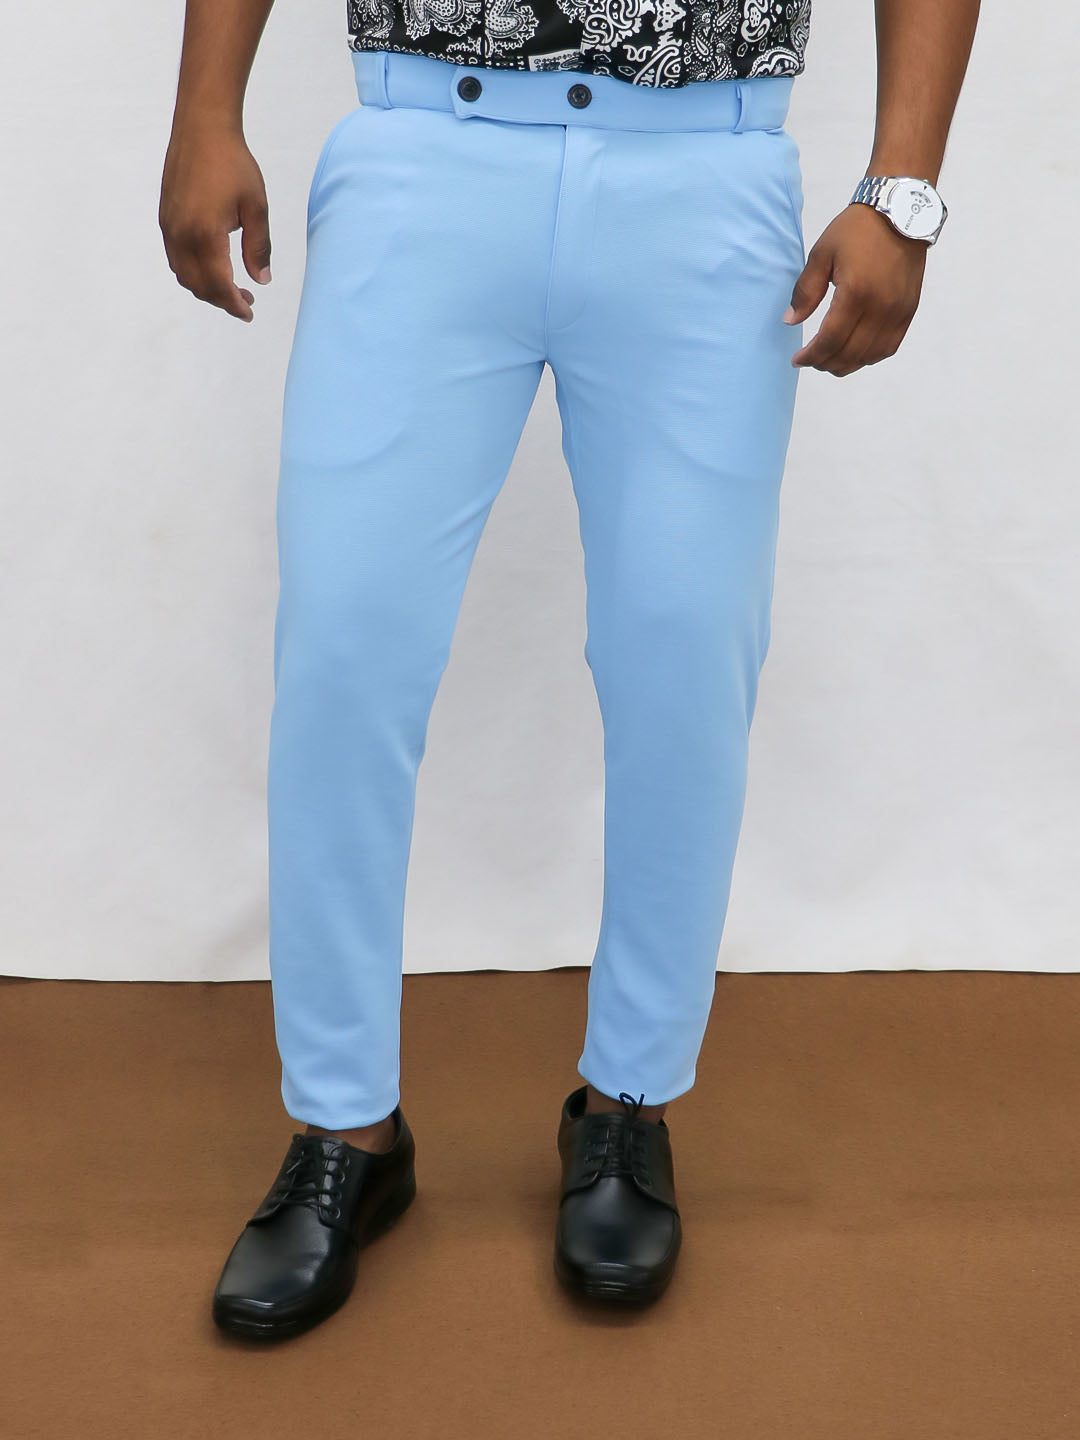 Canvas Men Cotton Lycra Pants at Best Price in Gurugram | Tahvo Designs And  Productions